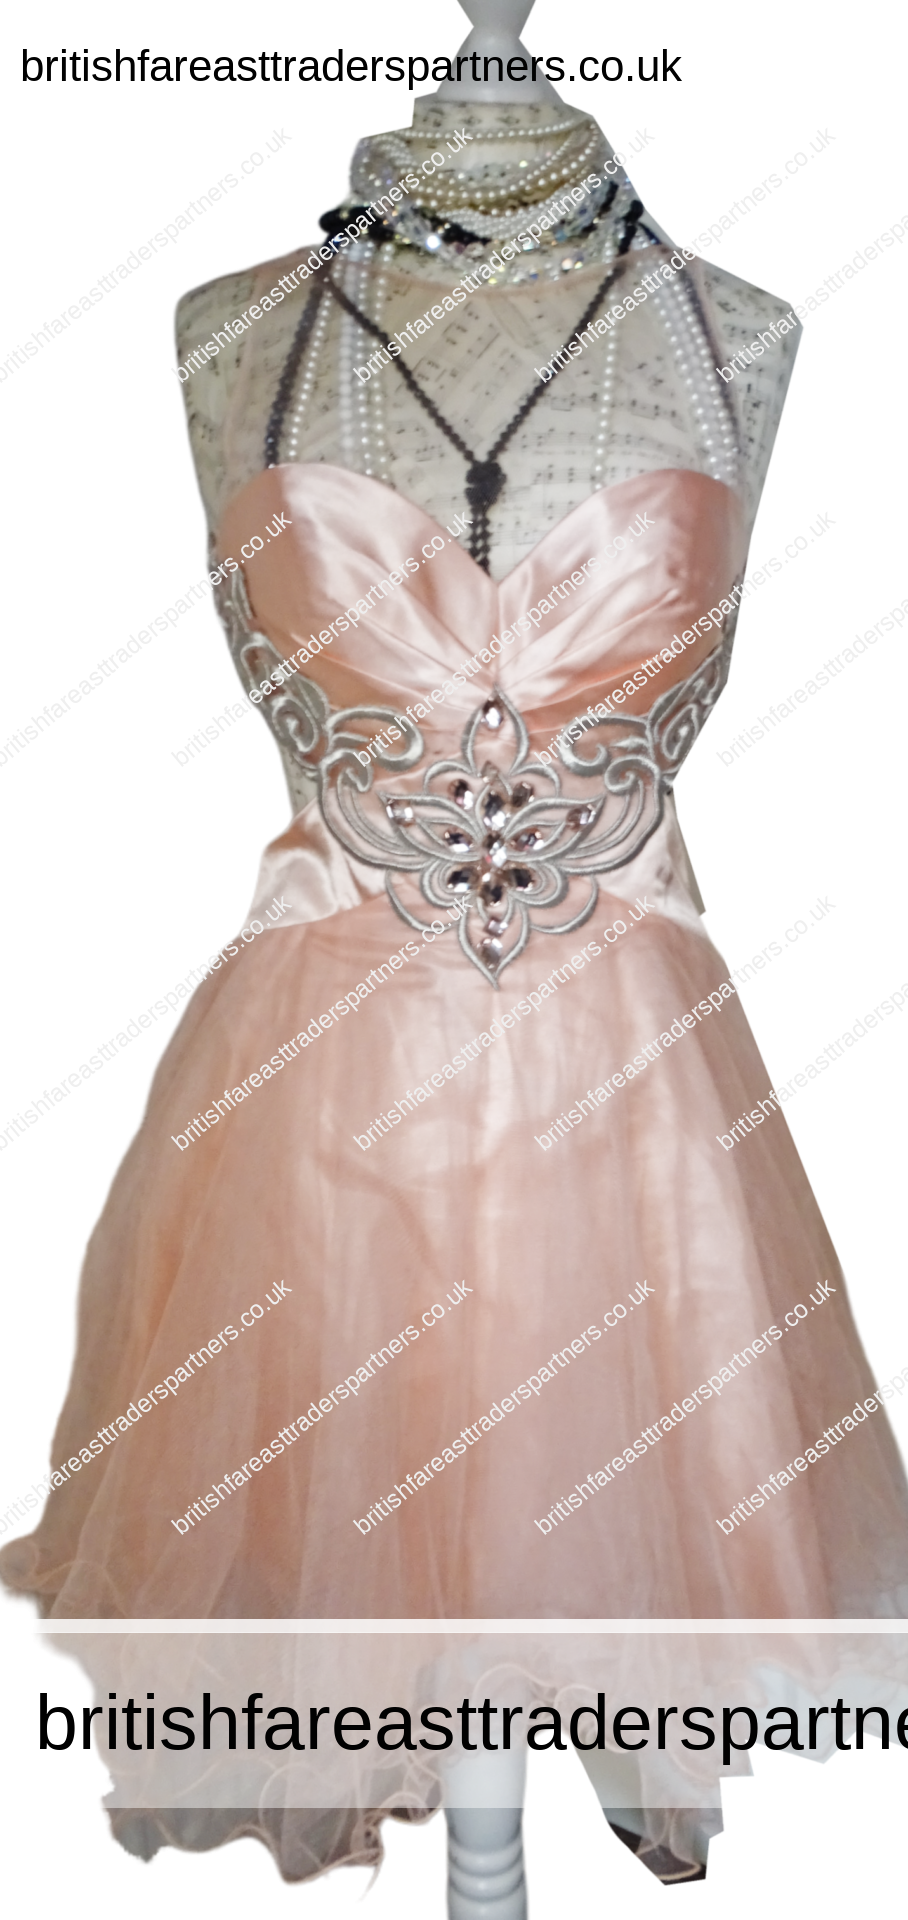 PEACH “FOREVER UNIQUE” BRIDESMAIDS DRESS UK 10 EMBELLISHED & JEWELLED FIT & FLARE CHIFFON CUT-OUT DRESS FASHION | LIFESTYLE | WEDDINGS | PARTY | COCKTAIL